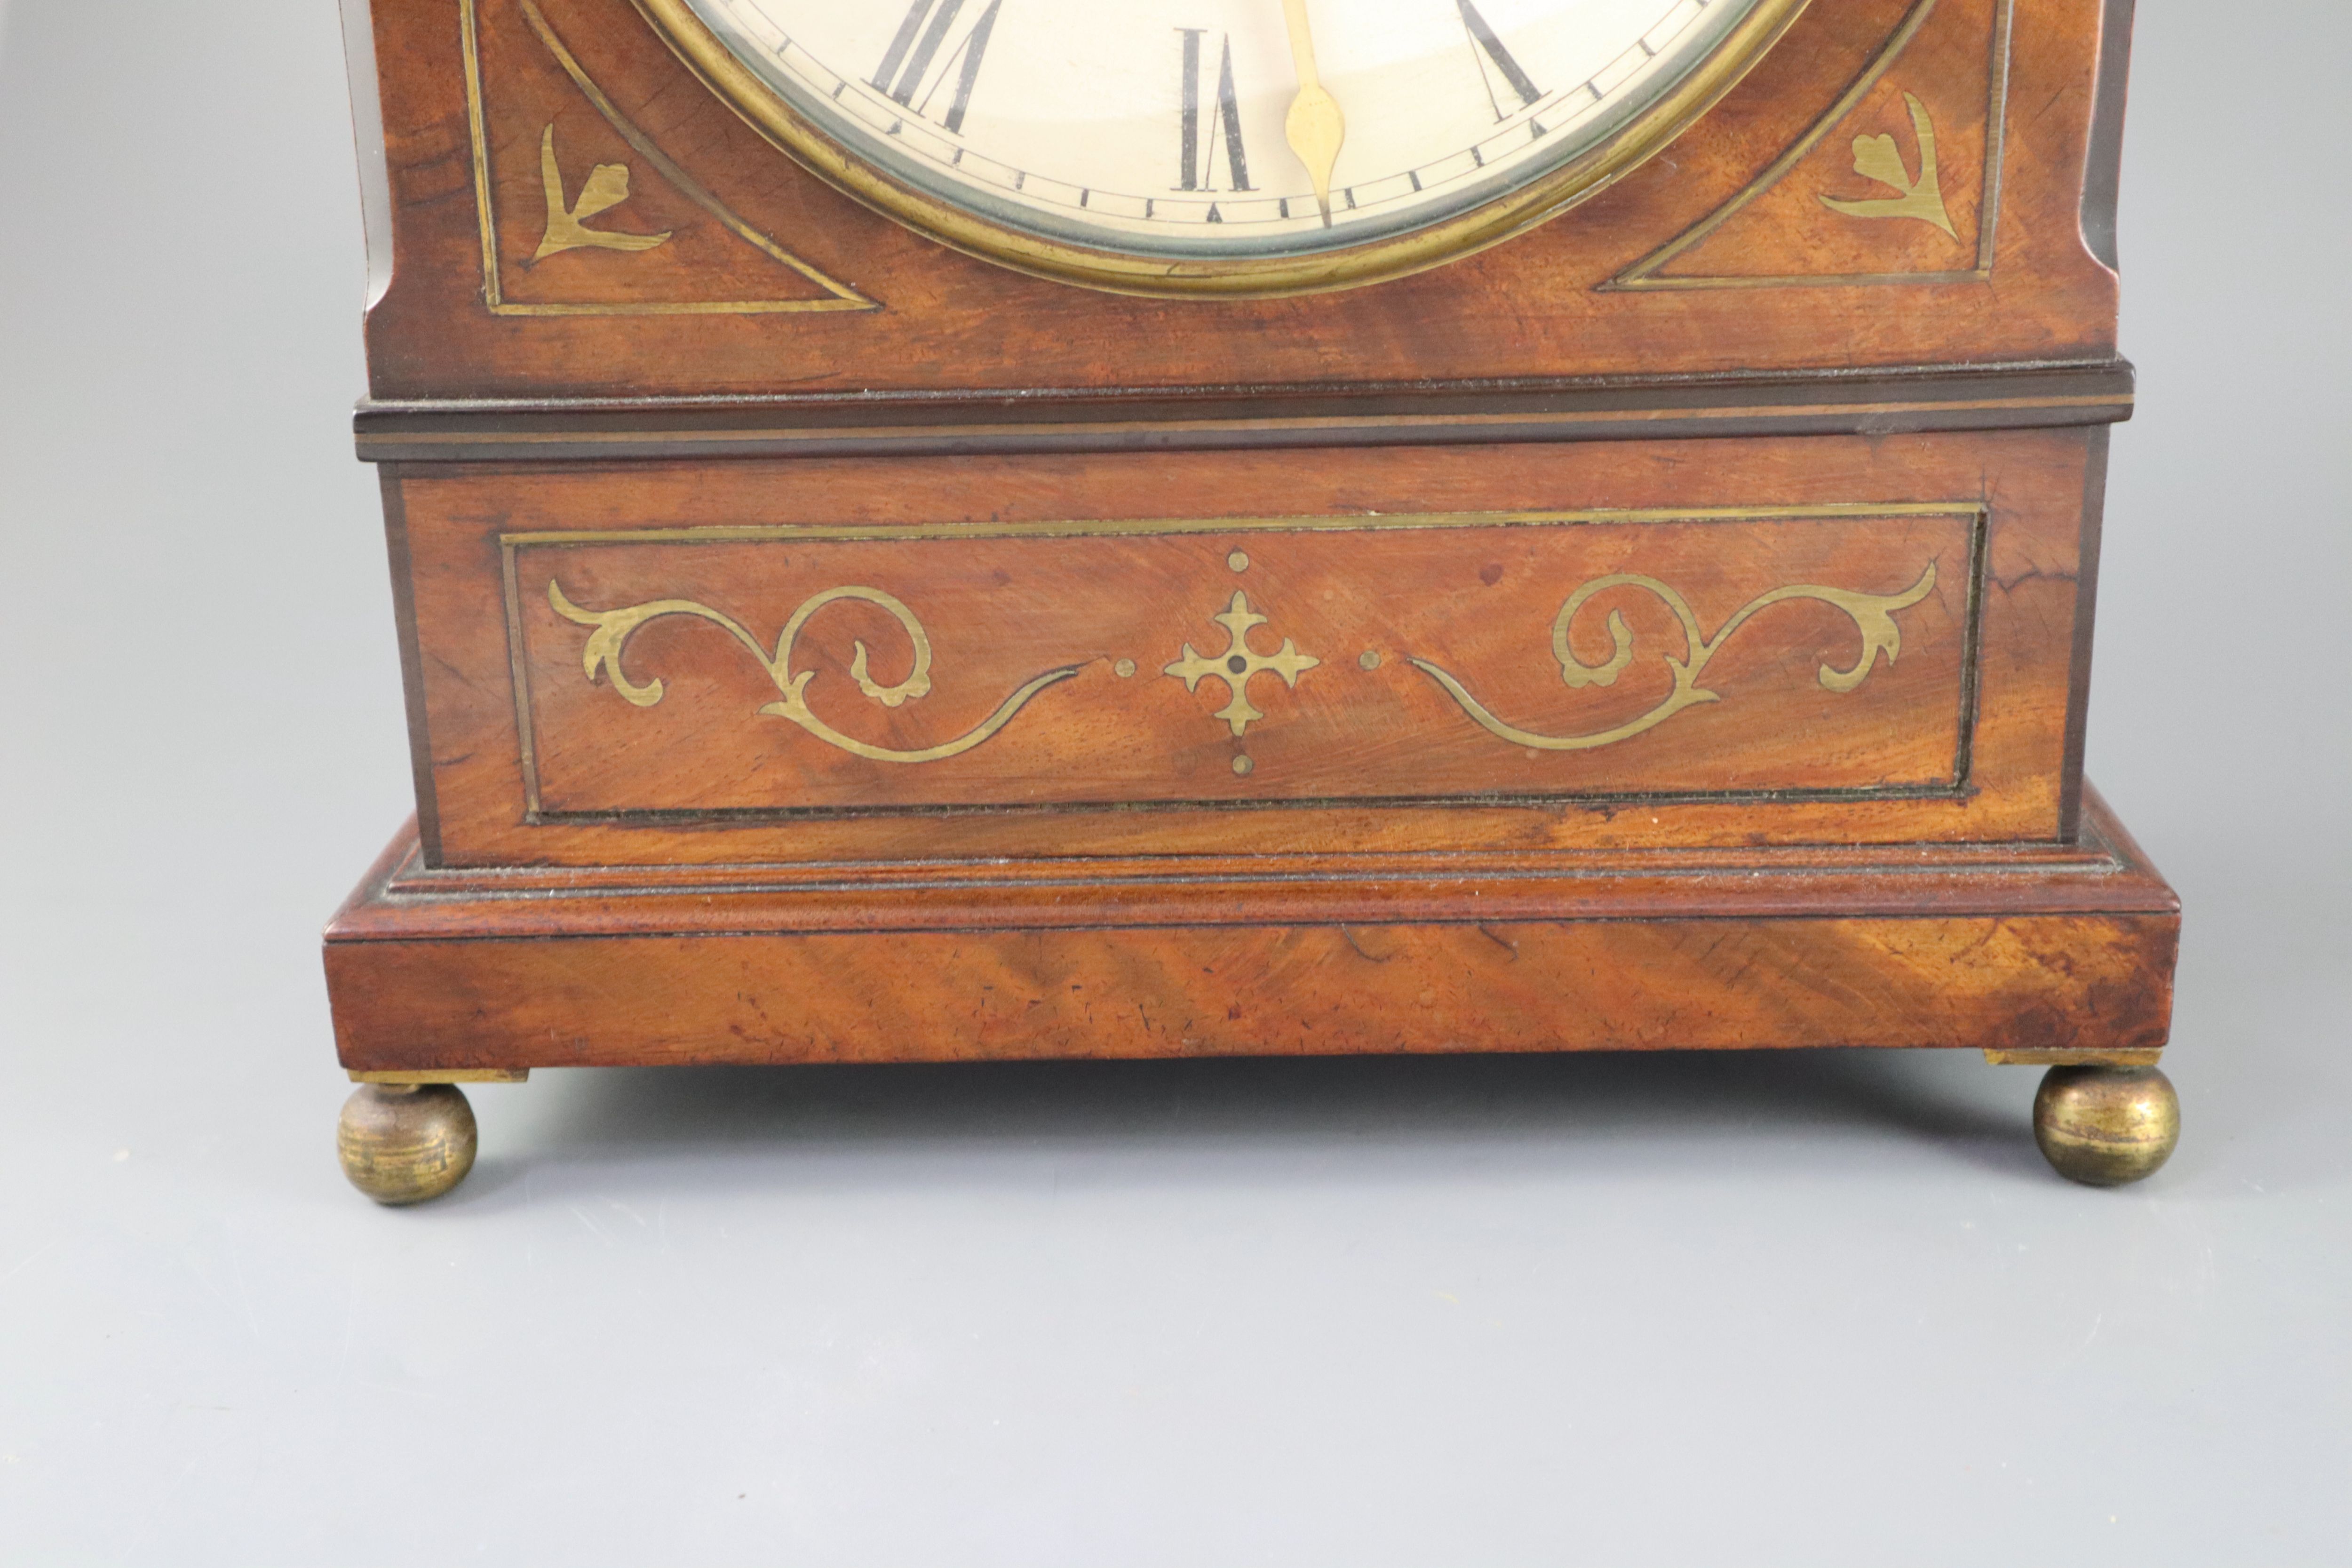 Dwerryhouse & Carter of London. A Regency brass inset mahogany mantel clock, height 19.5in.